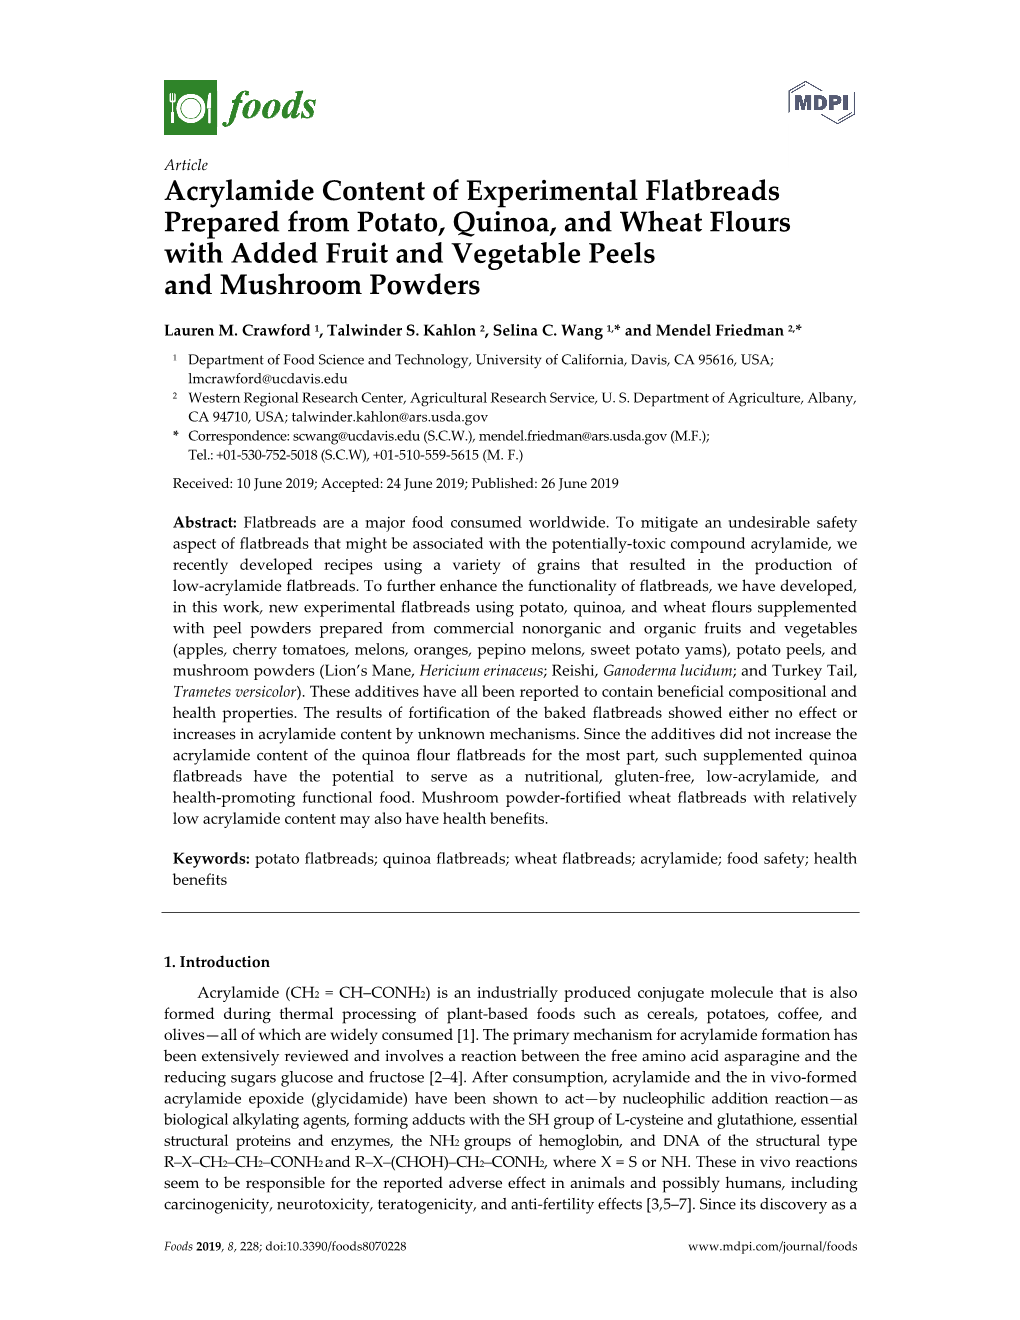 Acrylamide Content of Experimental Flatbreads Prepared from Potato, Quinoa, and Wheat Flours with Added Fruit and Vegetable Peels and Mushroom Powders